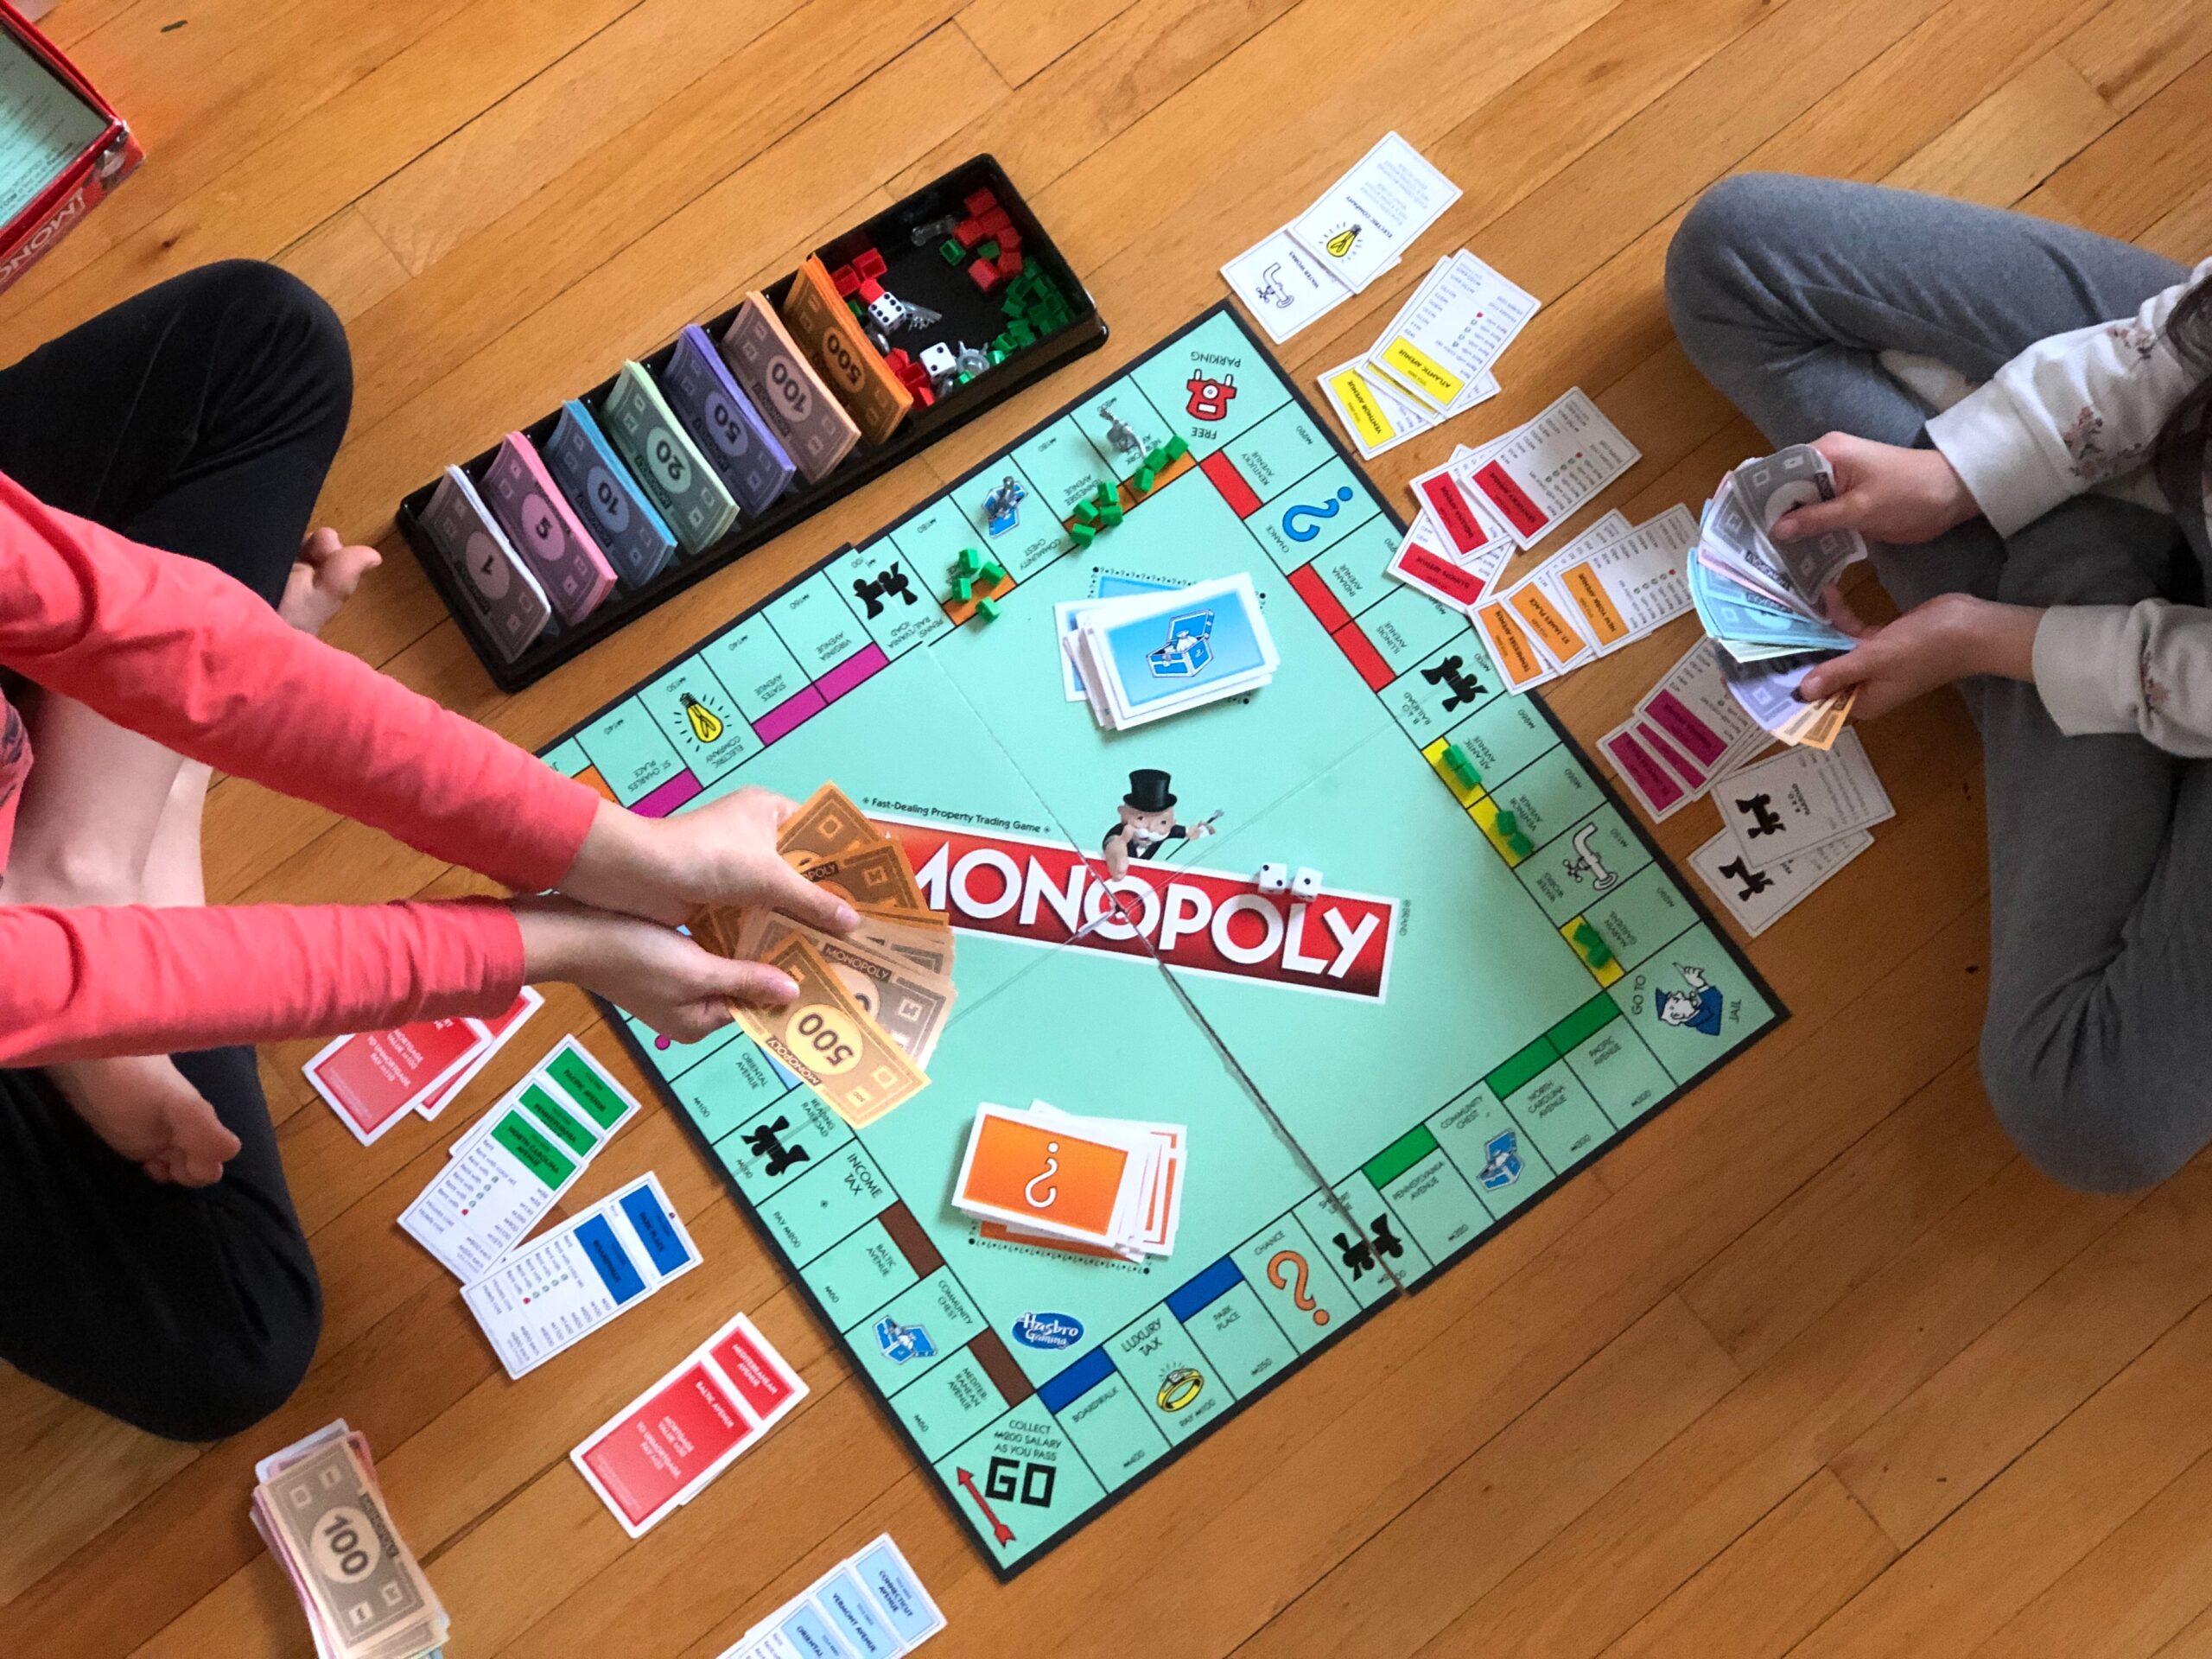 25 Free Board Games You Can Play Without Spending a Dime